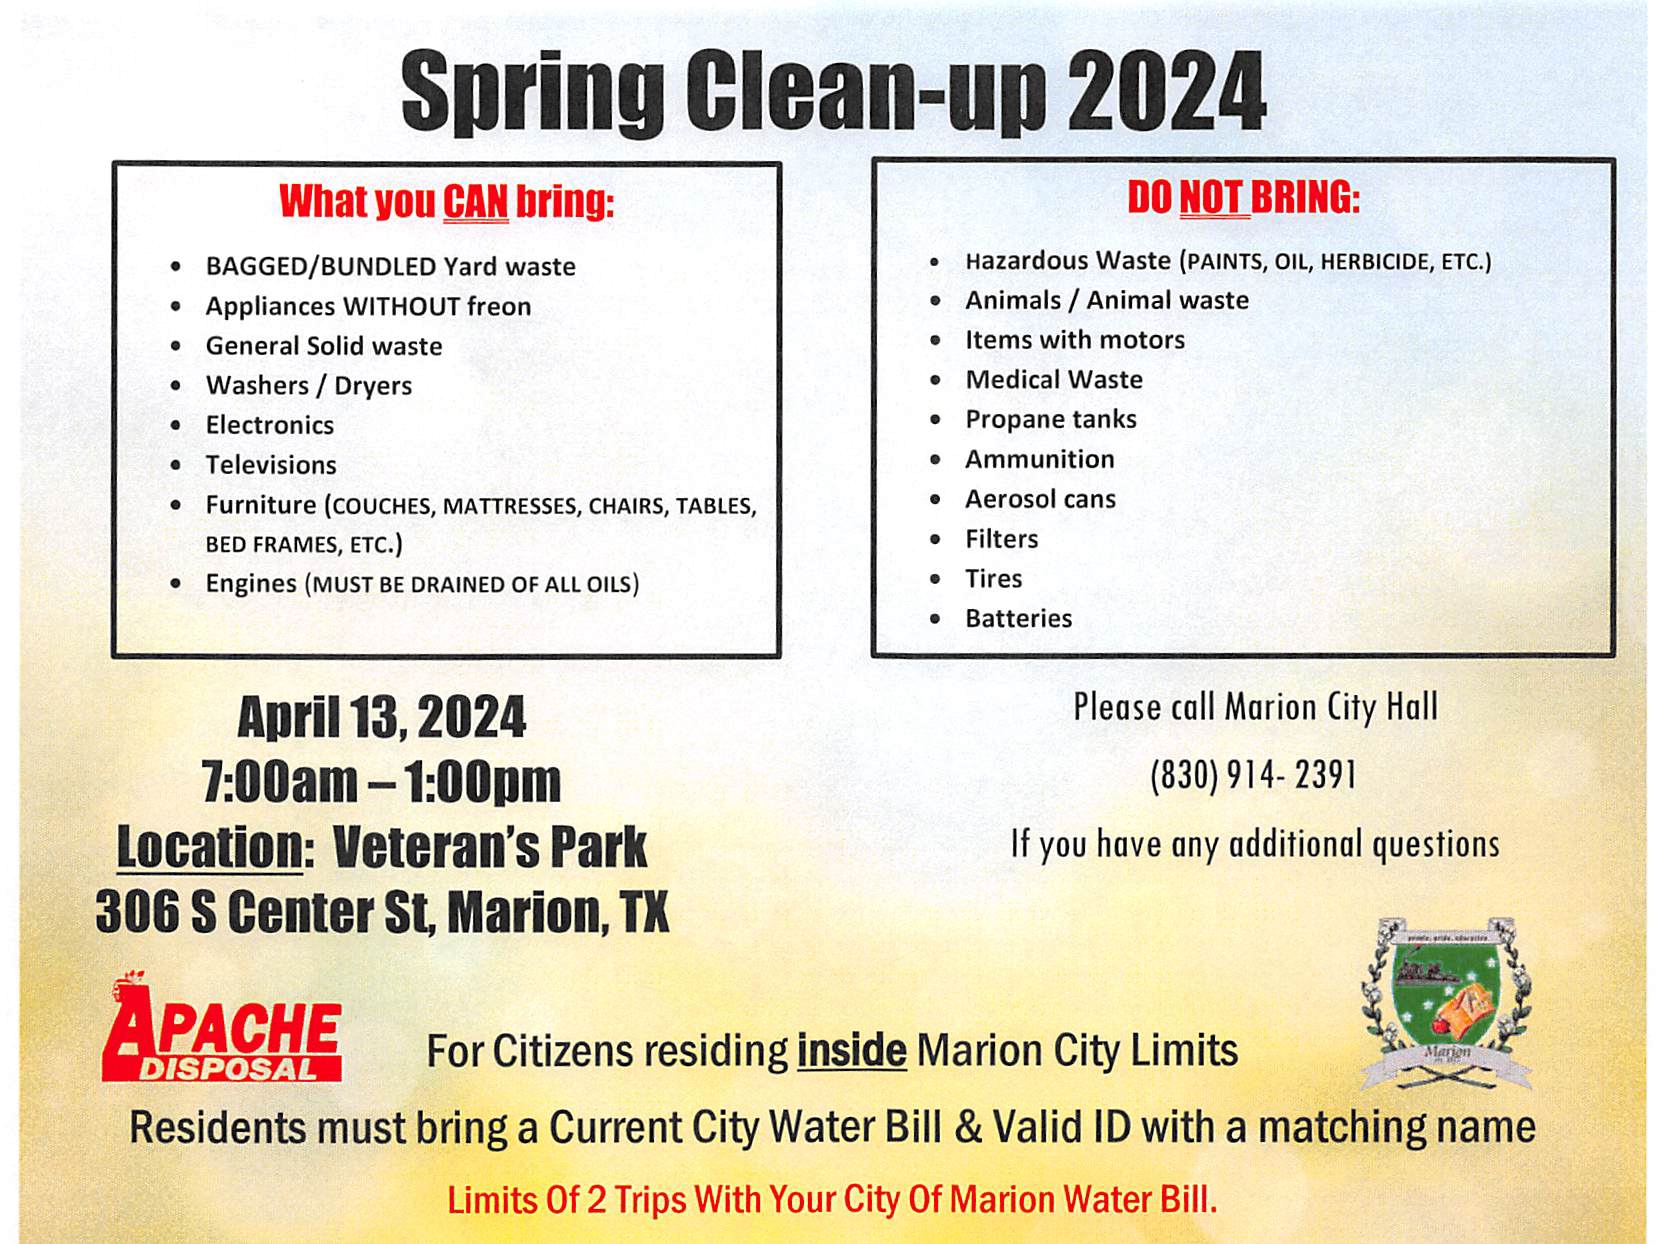 SPRING CLEAN UP 2024 MARION